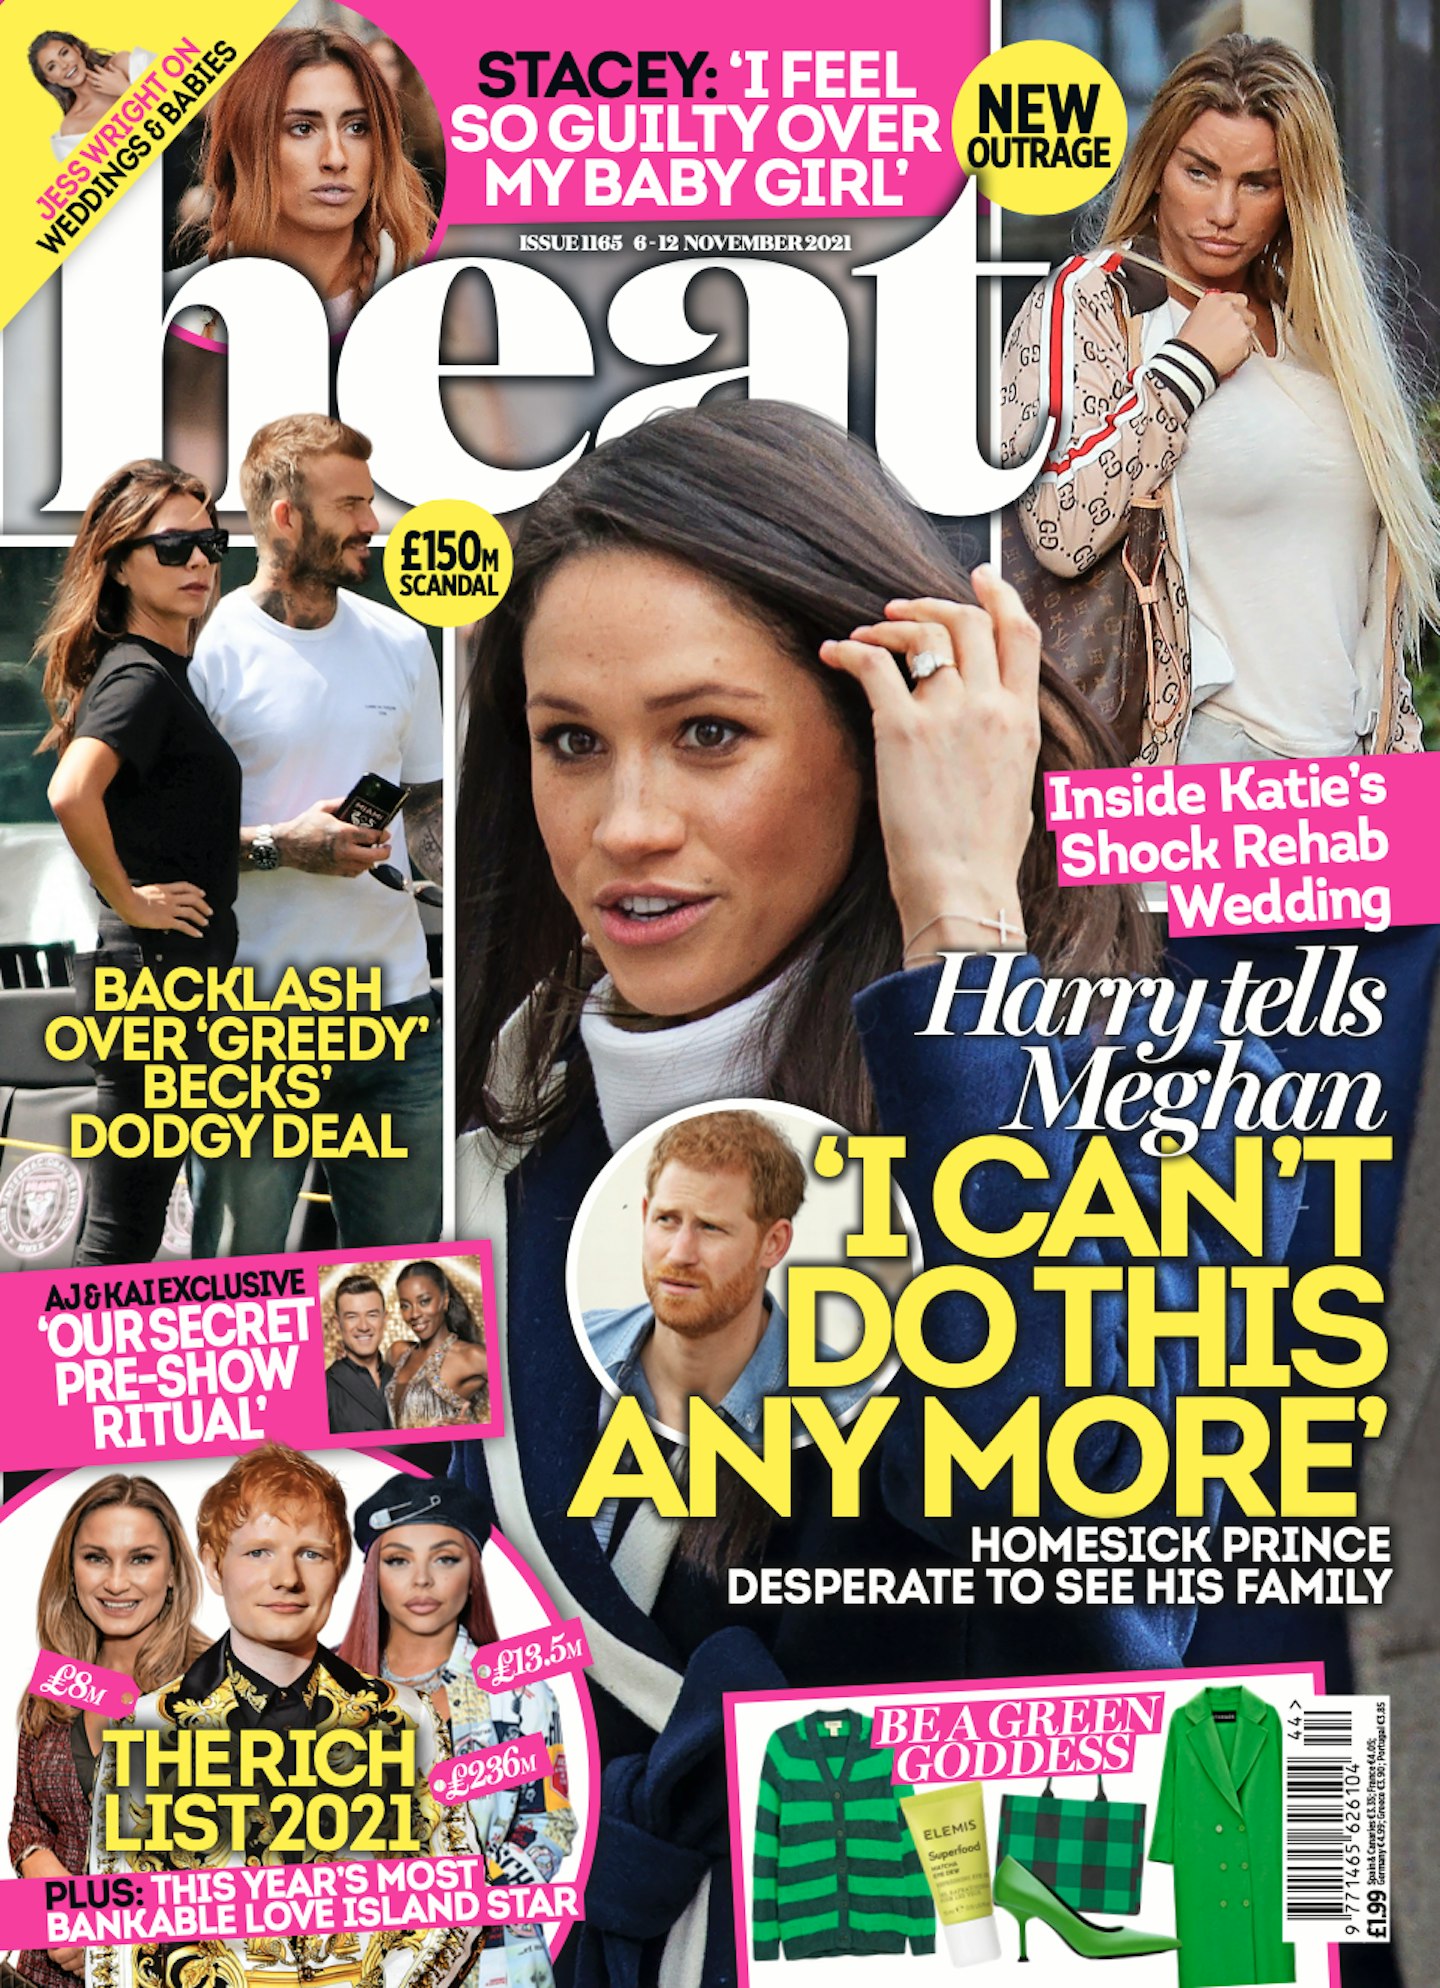 Read more in the latest issue of heat magazine - OUT NOW